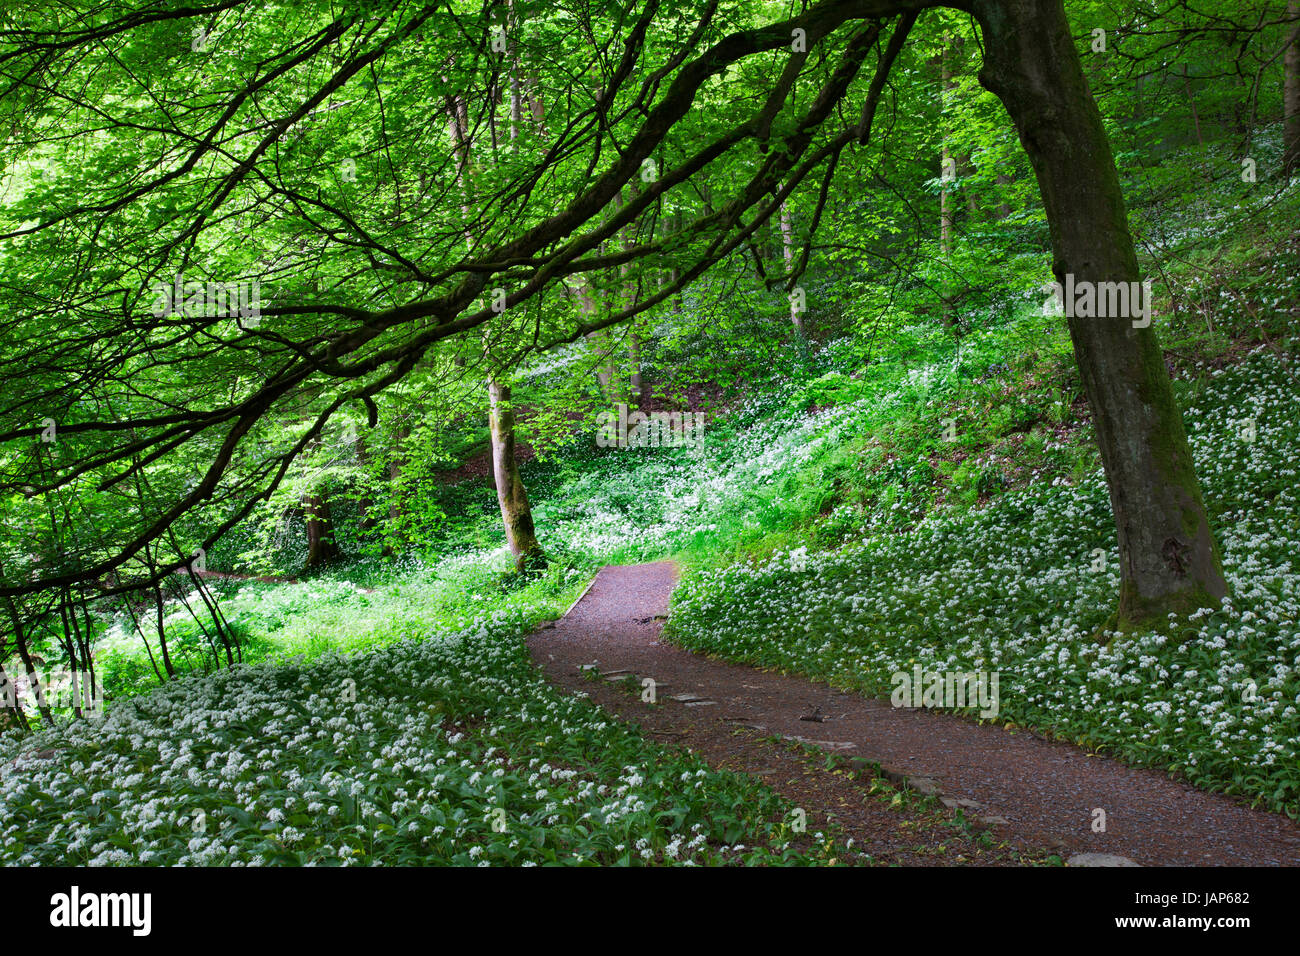 Wild Garlic in Strid Wood, Bolton Abbey Estate, Wharfedale, Yorkshire Dales Stock Photo